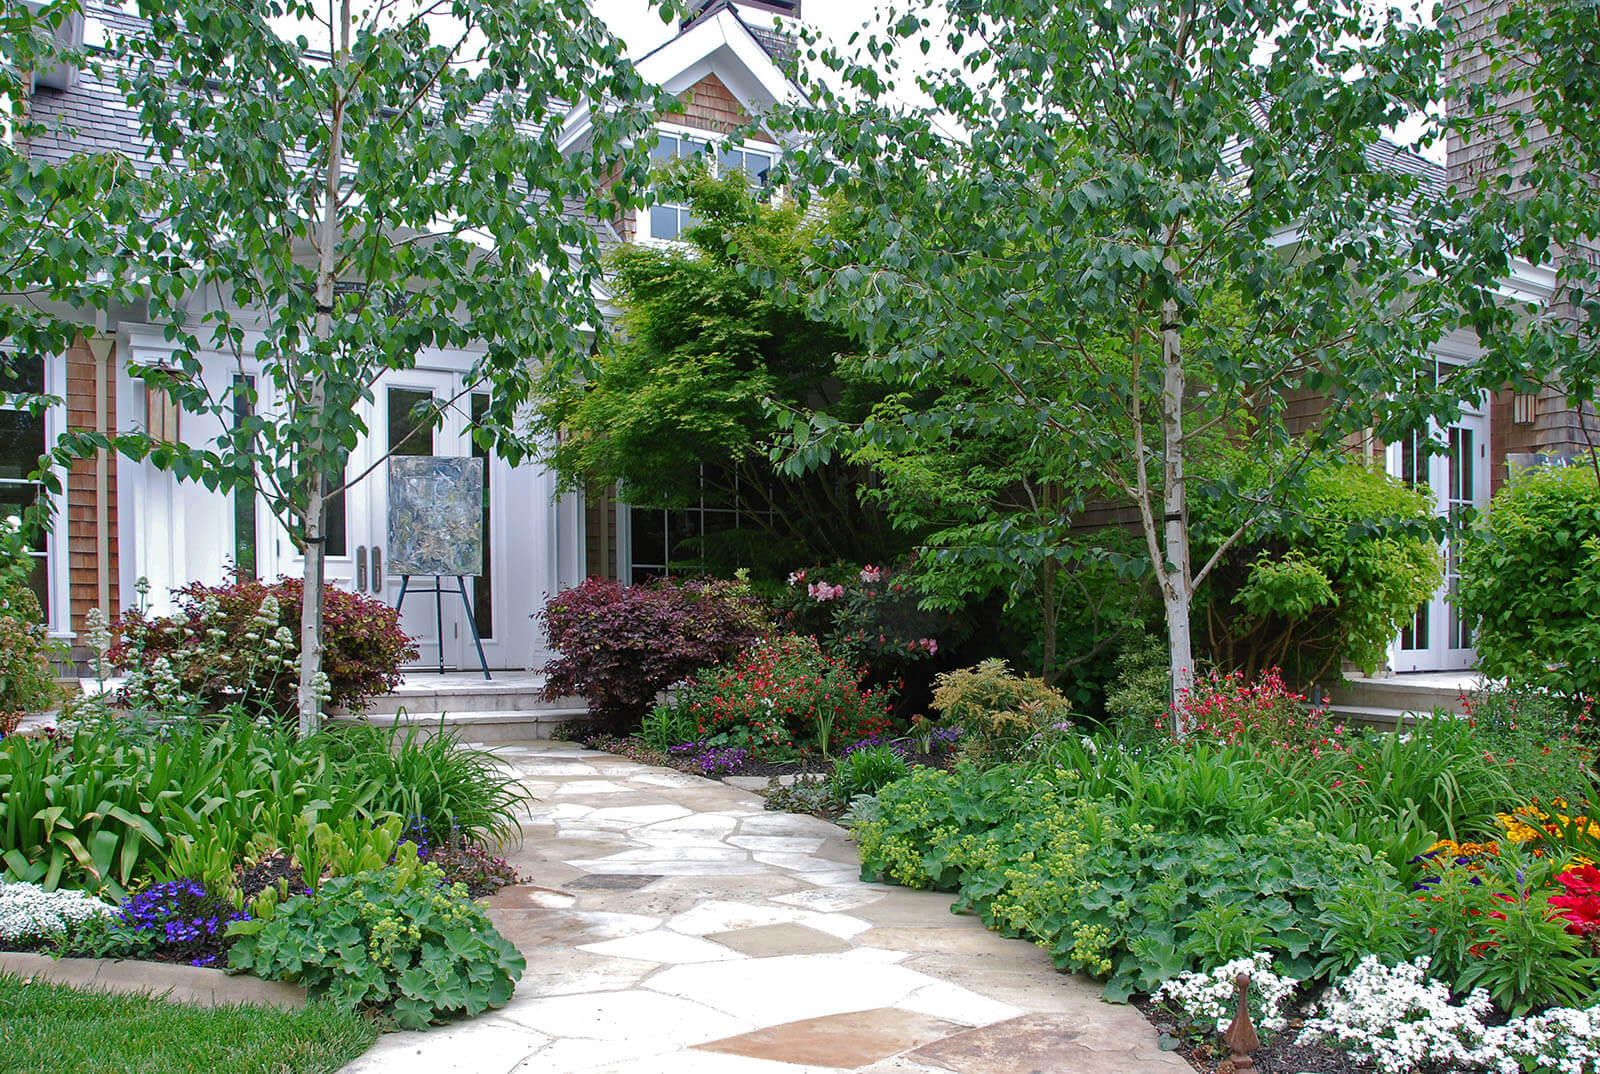 vibrant healthy garden beds with flowering plants, and dogwood trees parted by white stone walkway leading to abstract painting in front of doorway